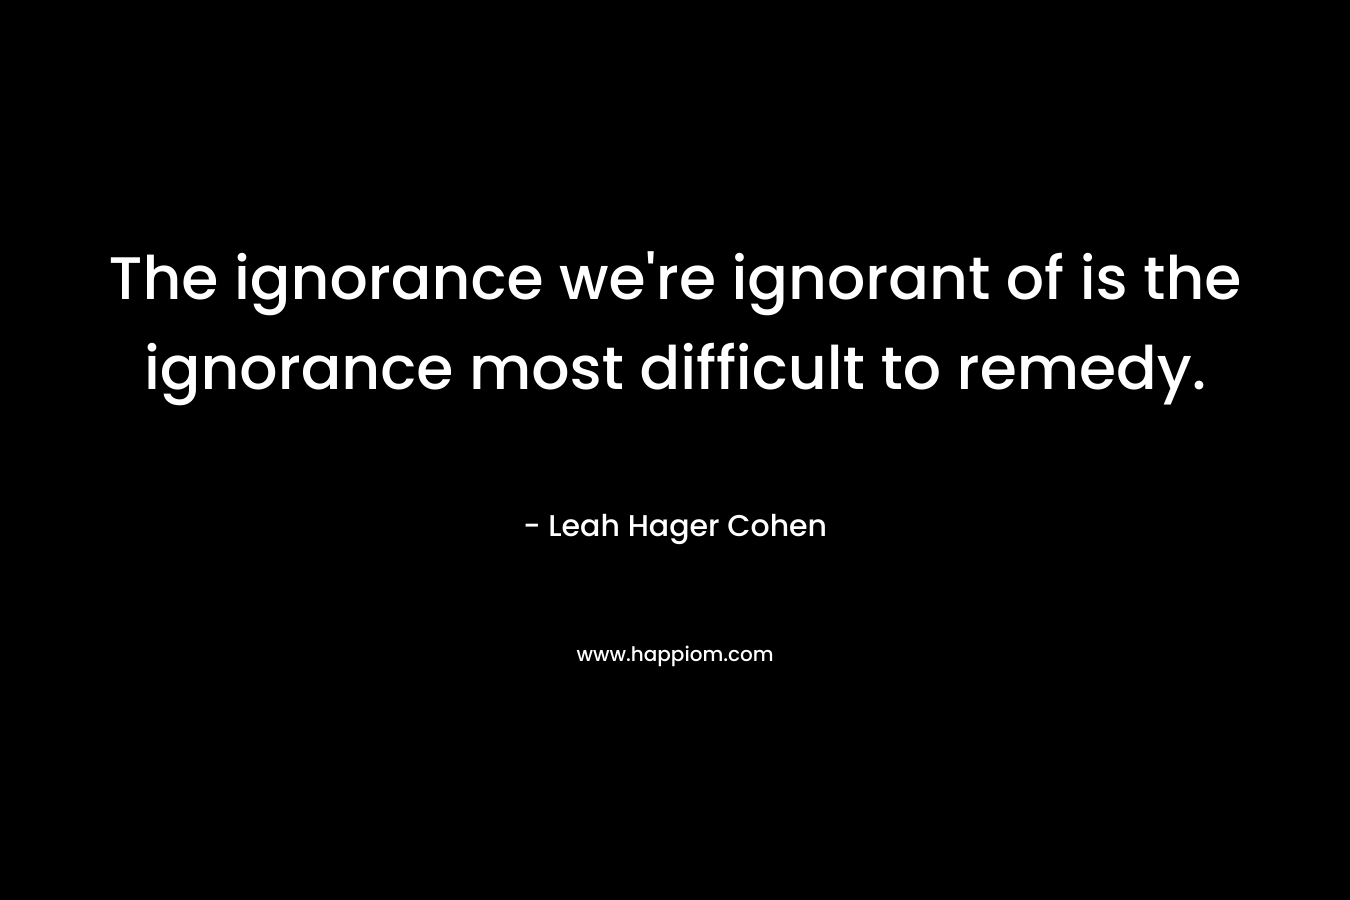 The ignorance we’re ignorant of is the ignorance most difficult to remedy. – Leah Hager Cohen